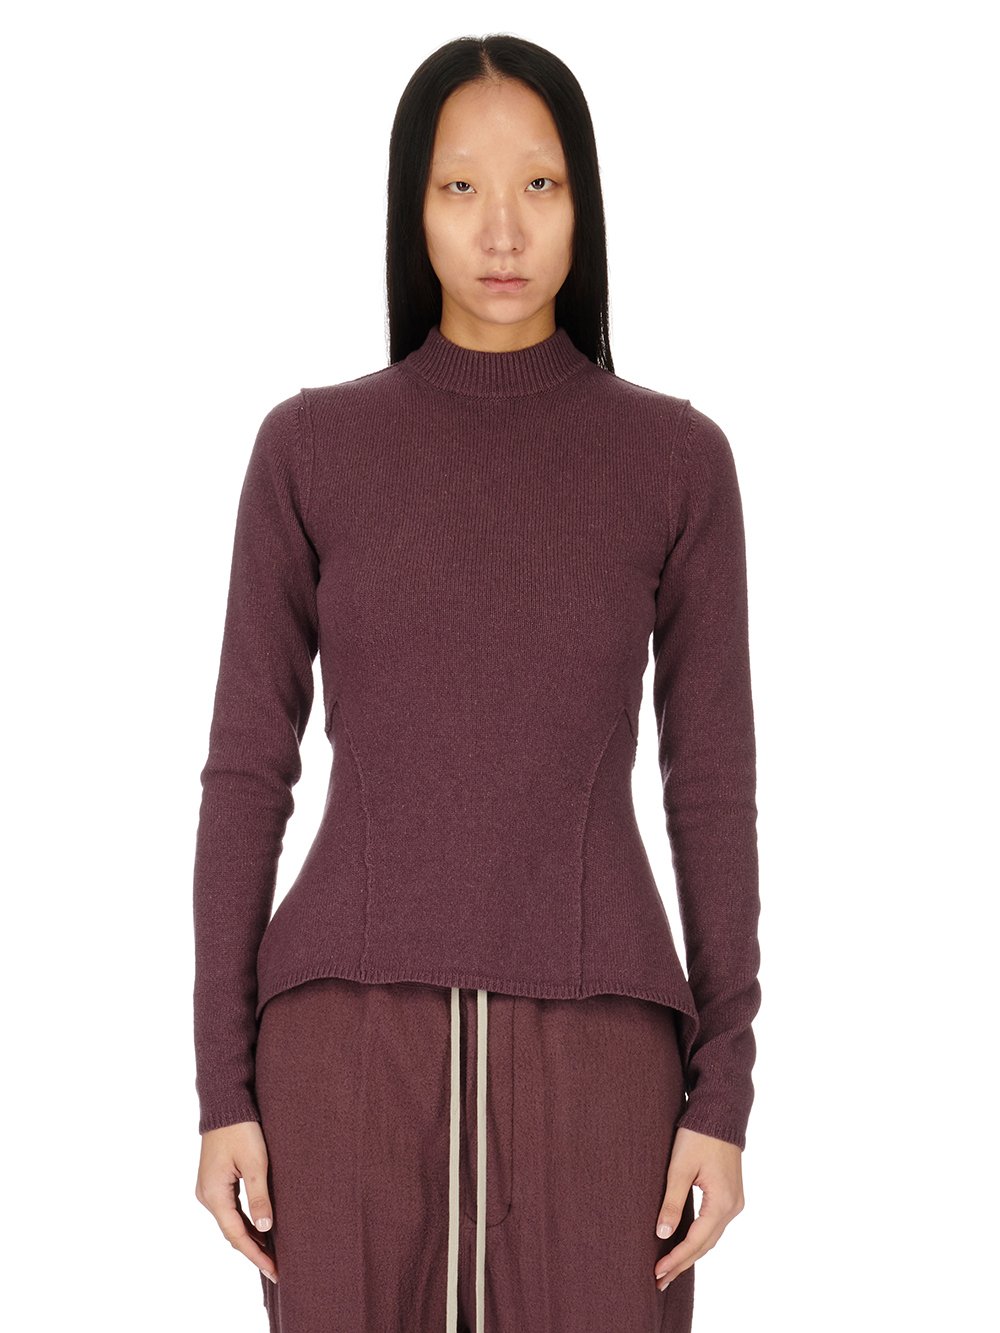 RICK OWENS FW23 LUXOR NASKA LUPETTO IN AMETHYST RECYCLED CASHMERE KNIT